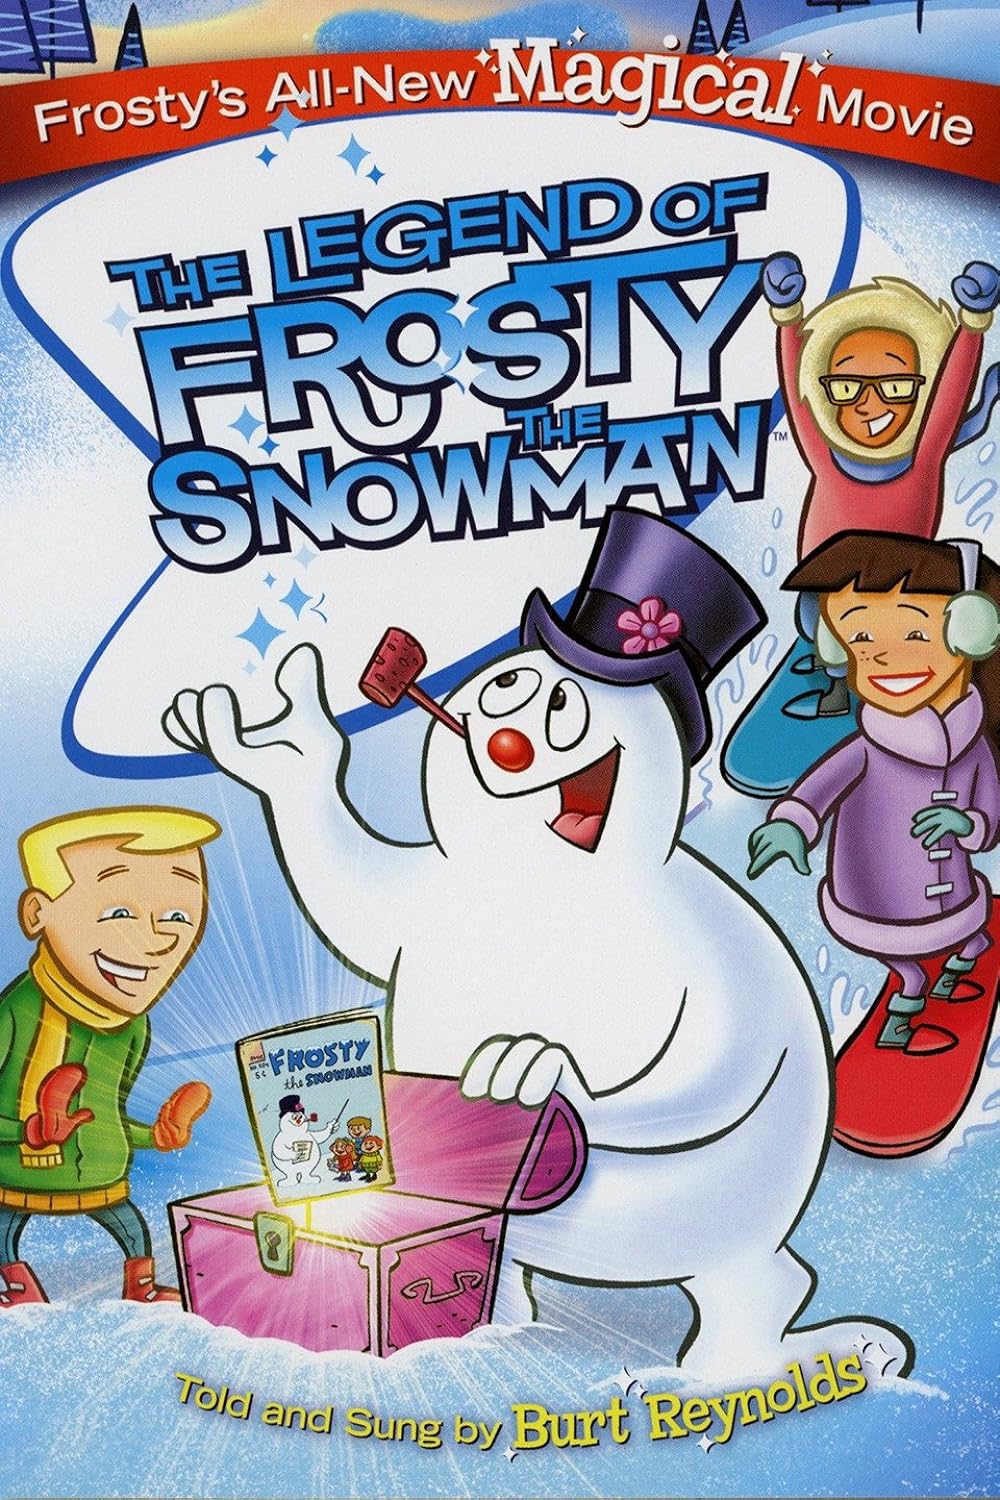 becky toy recommends Watch Frosty The Snowman Online